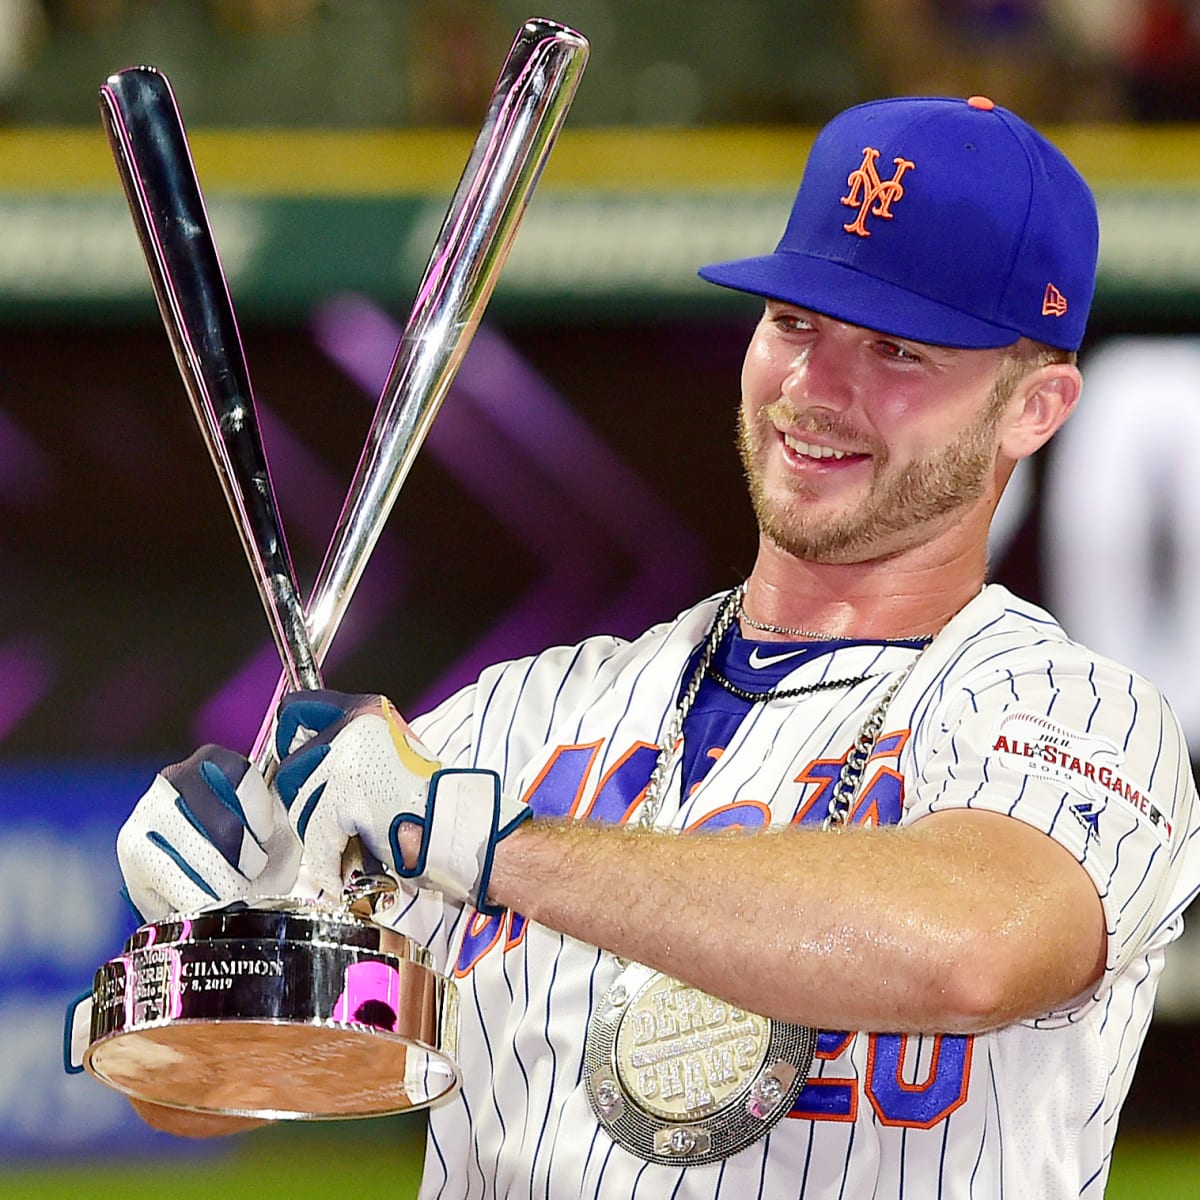 Pete Alonso's 37th HR lifts Mets past Cardinals